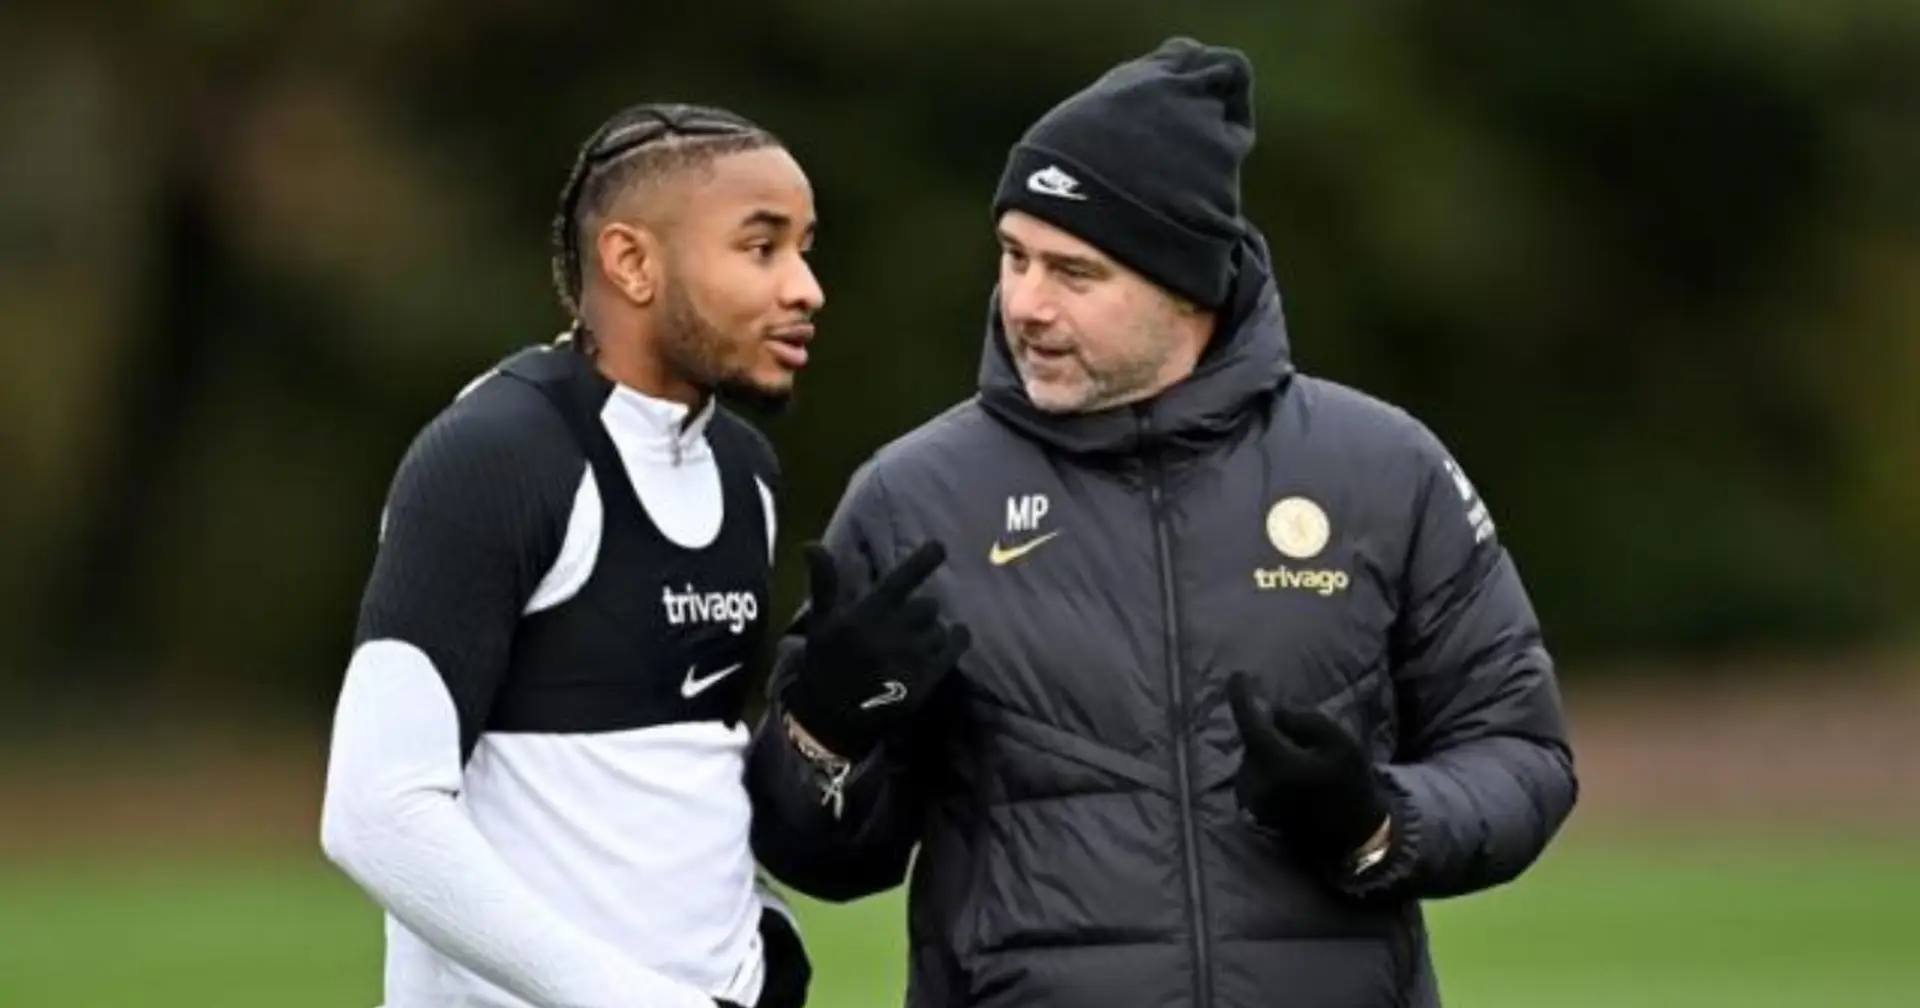 Nkunku back in partial team training & 3 more big stories at Chelsea you might've missed